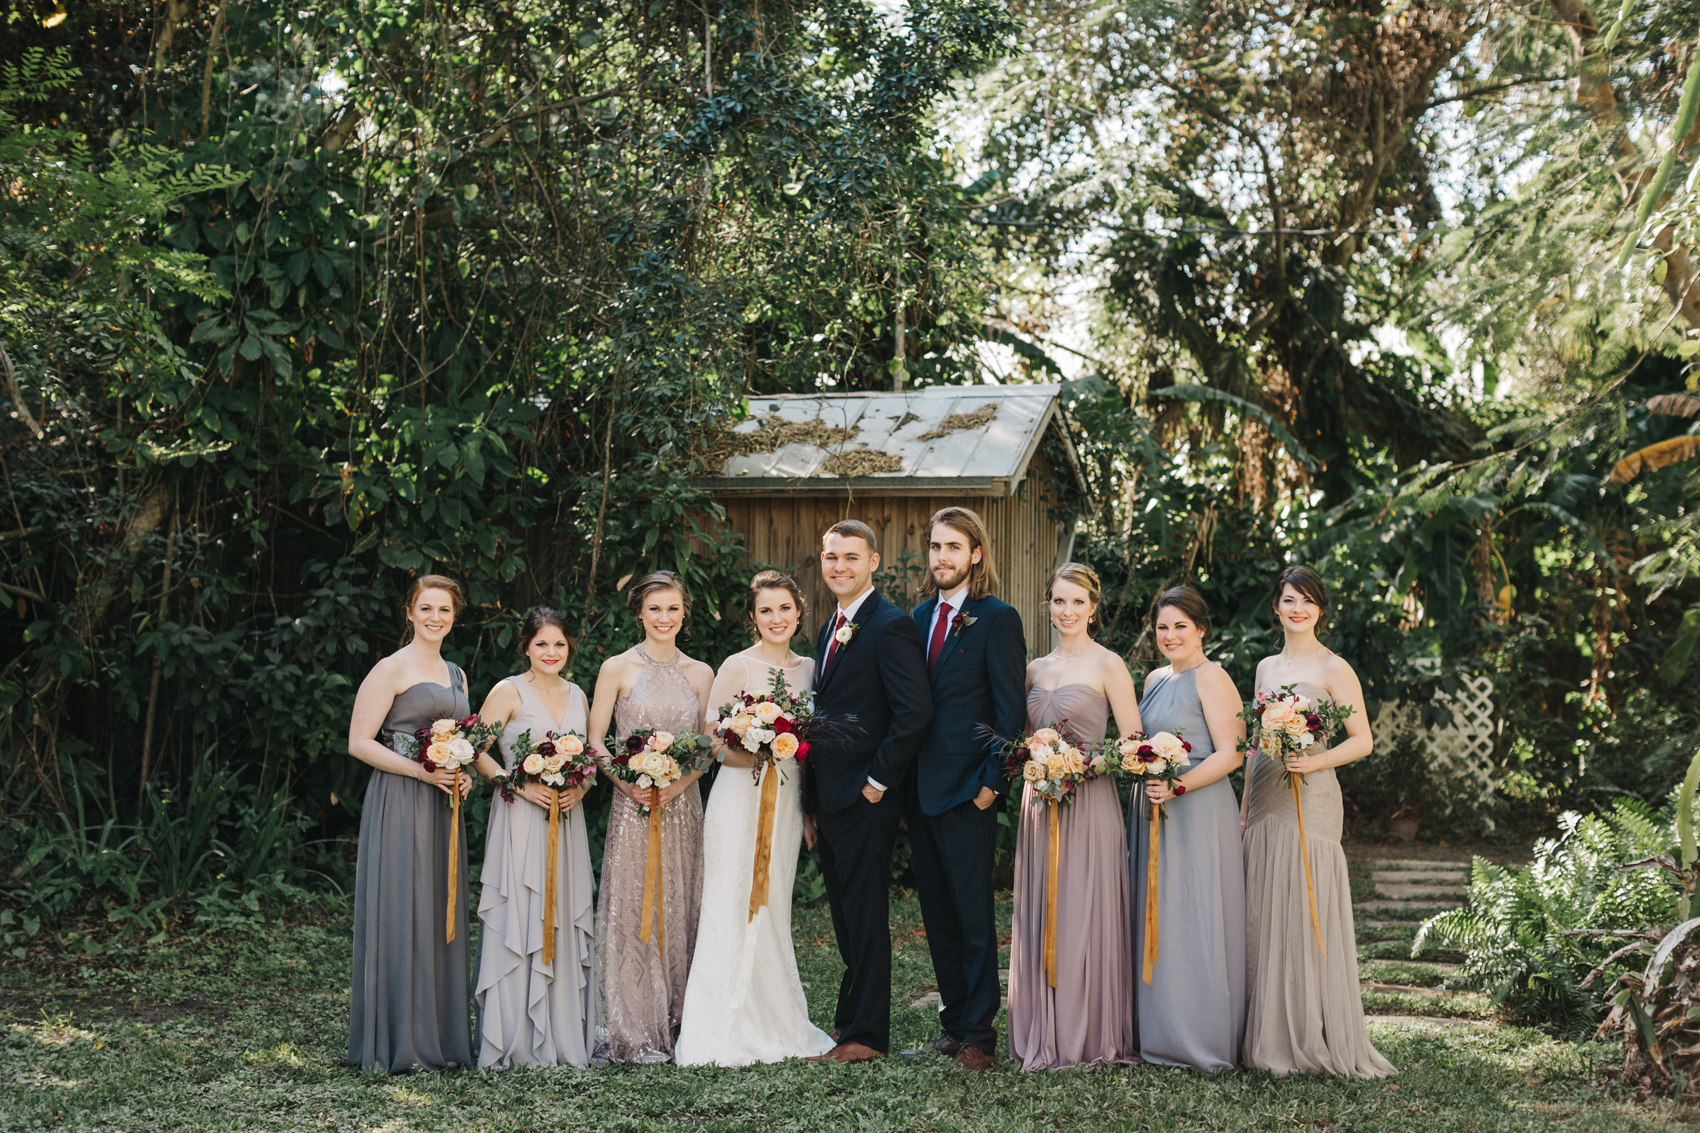 Mismatched bridal party wearing greys and lavendar